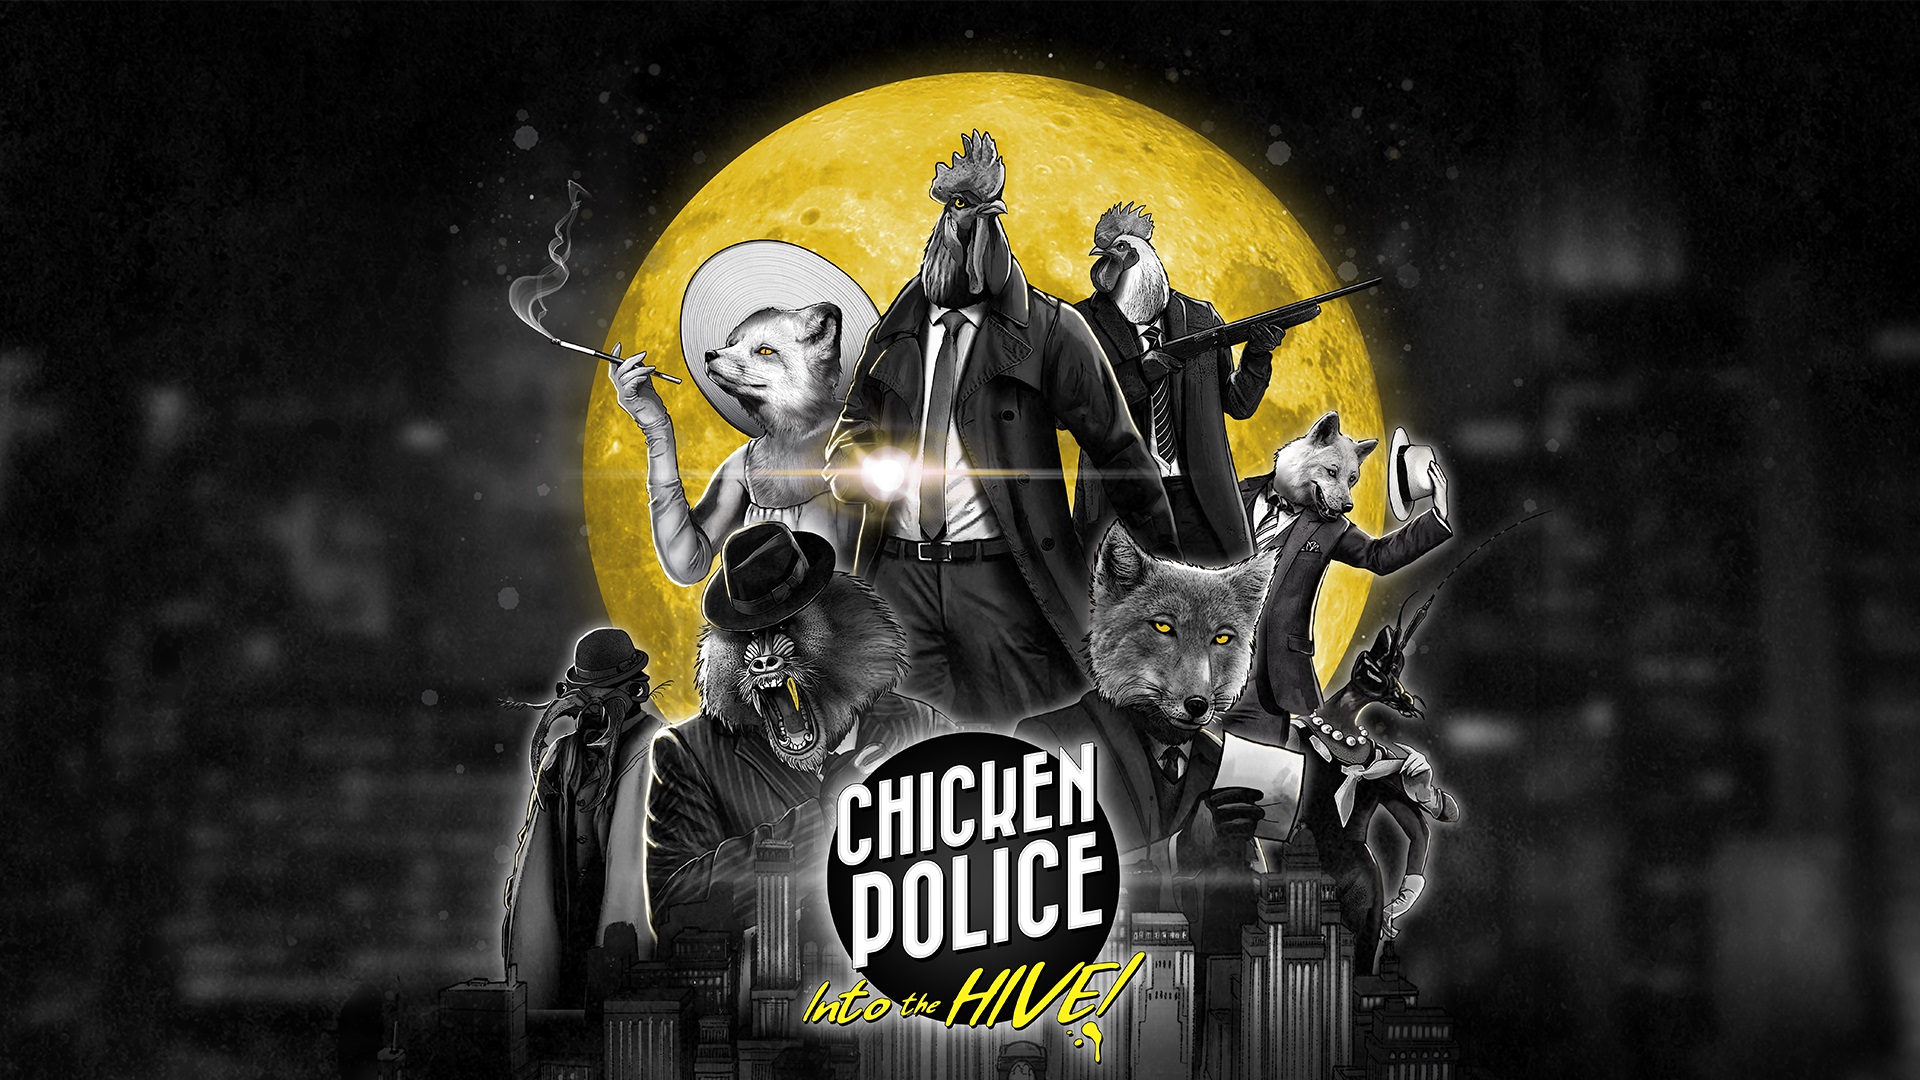 Chicken Police – Into the HIVE!